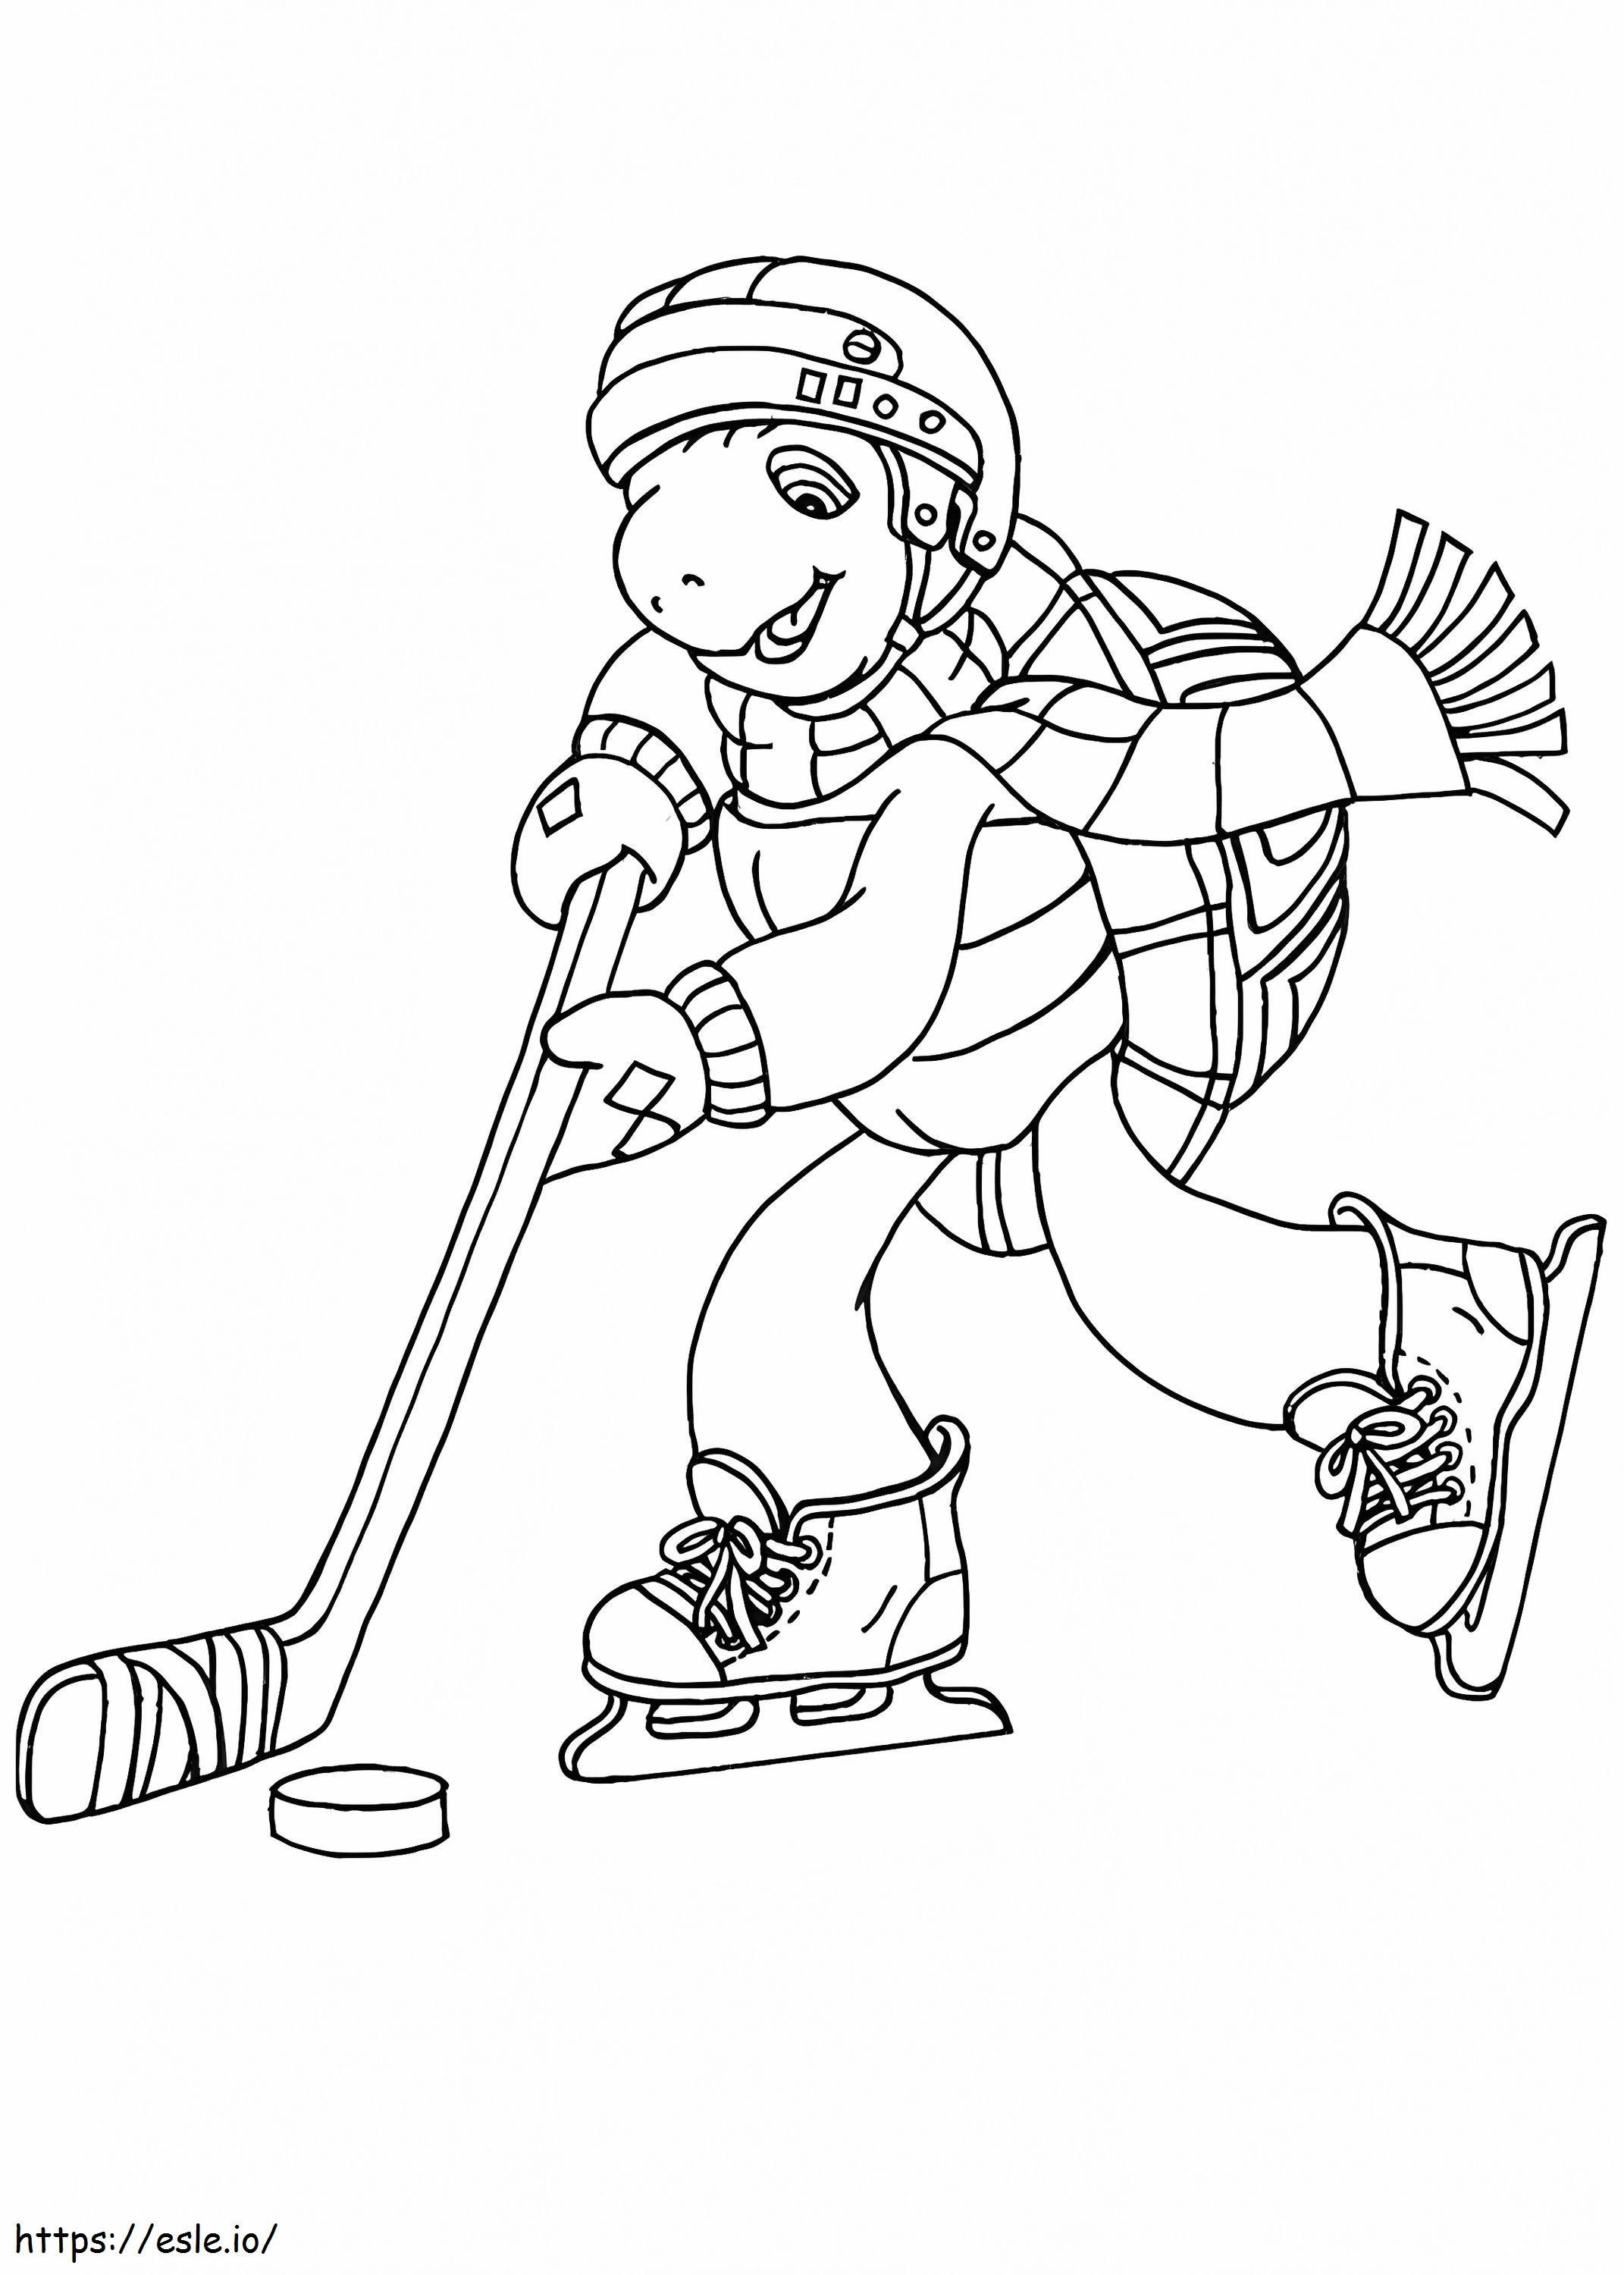 1535358244 Franklin Playing Hockey A4 coloring page